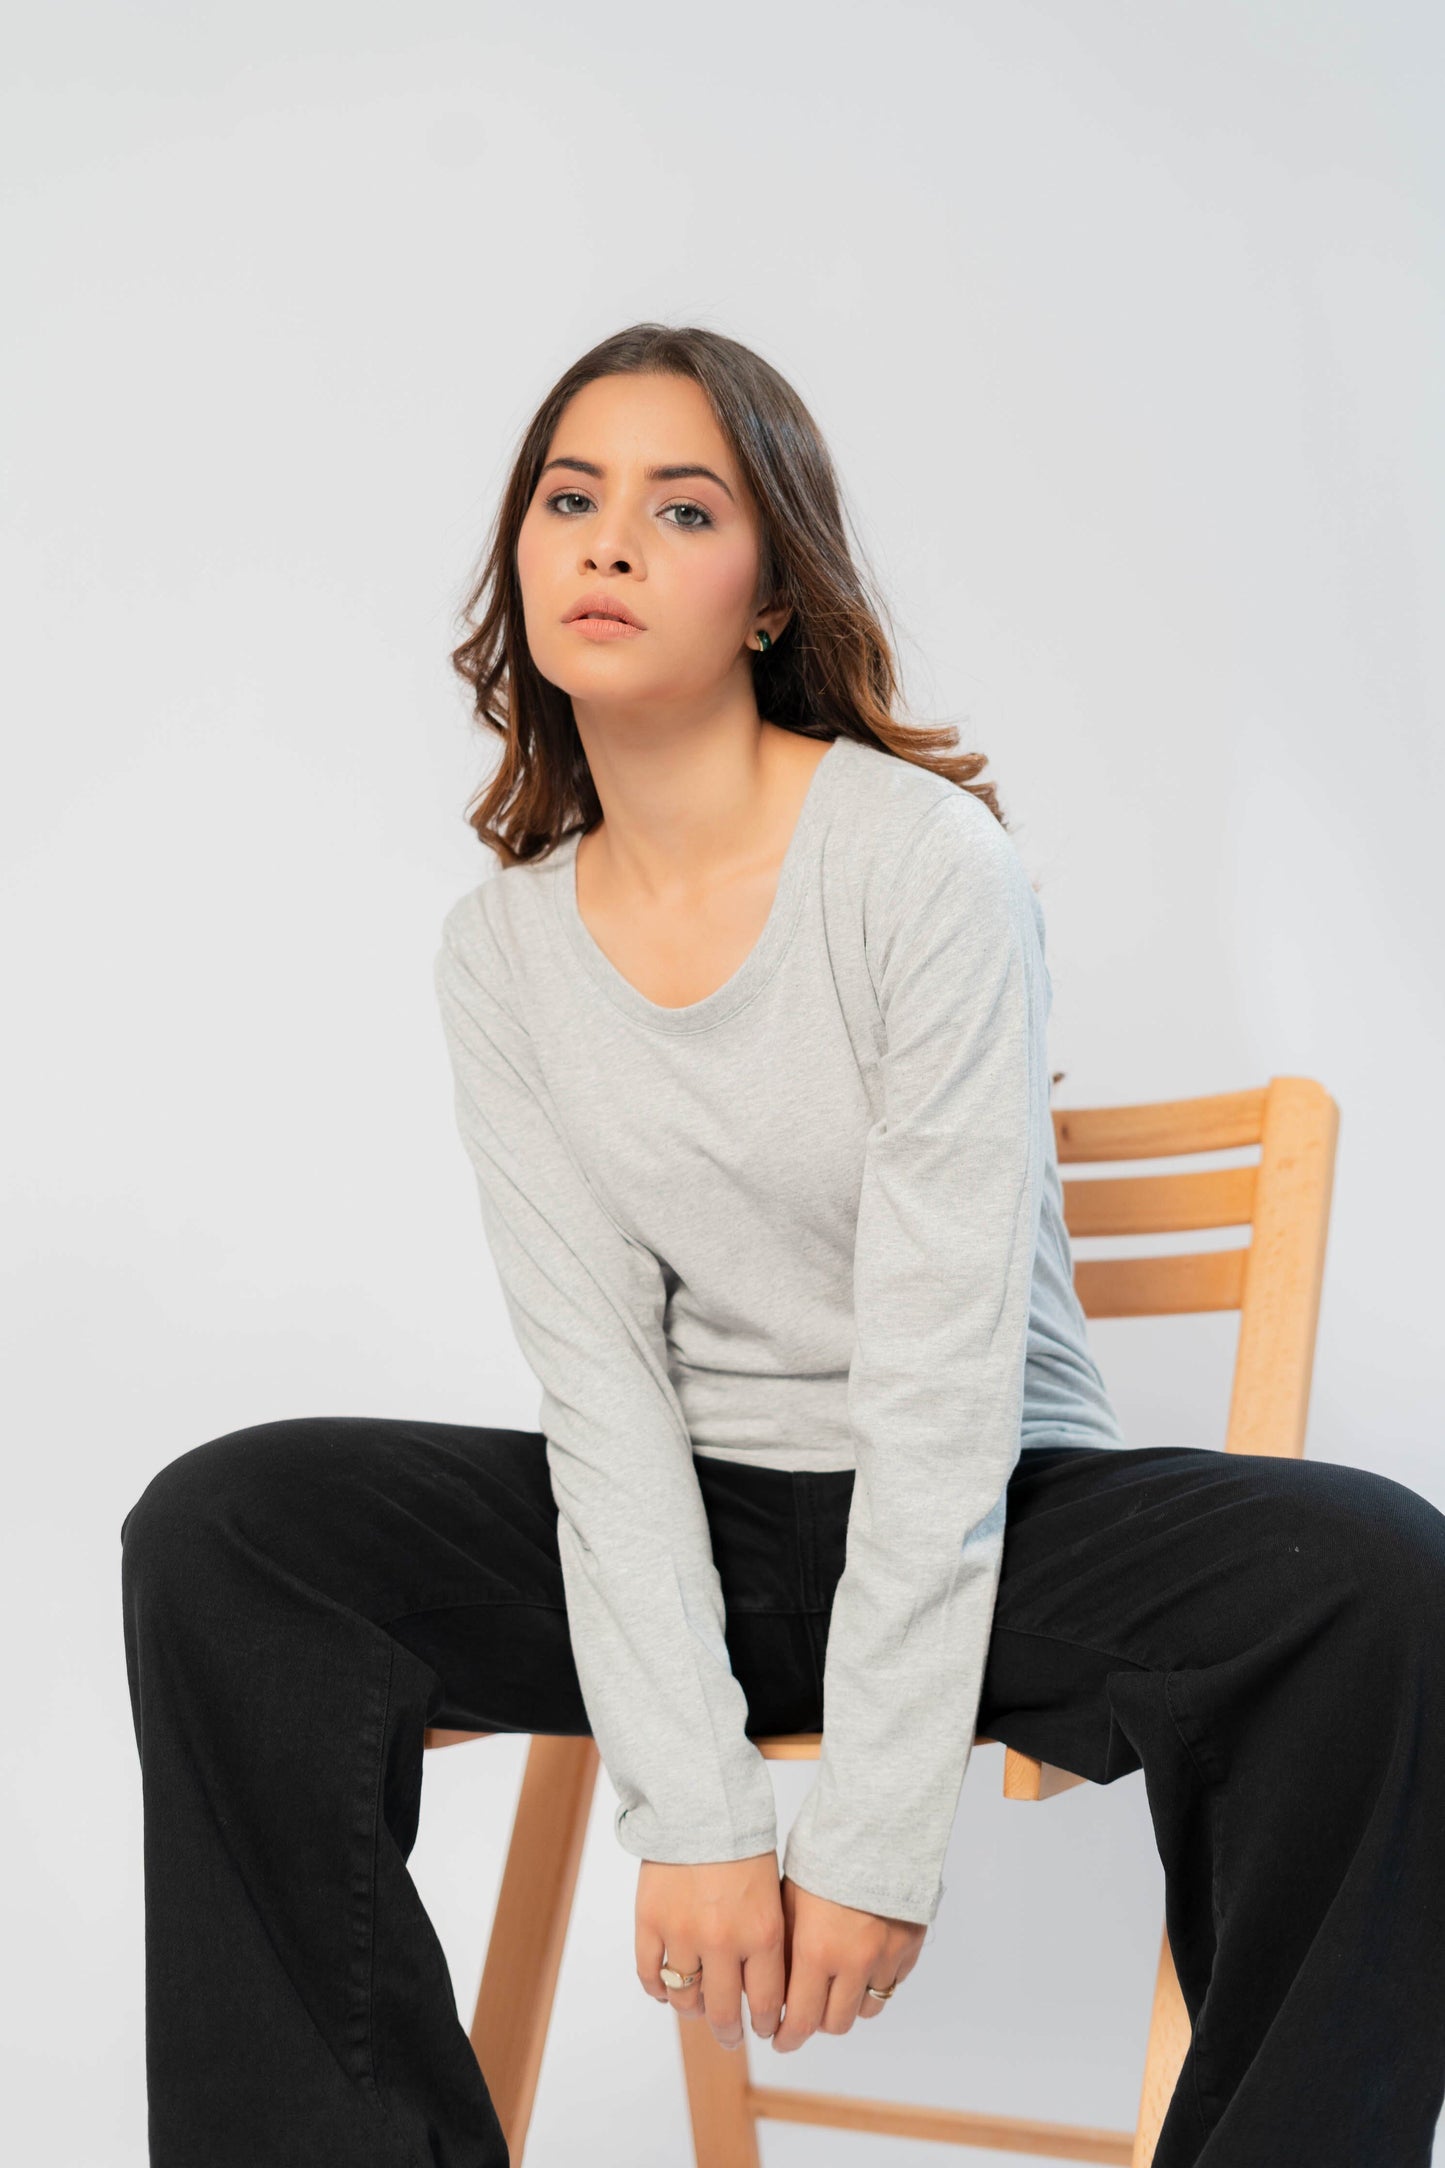 Berydale Women's Long-Sleeve Tee: Elegance in 100% BCI Combed Cotton